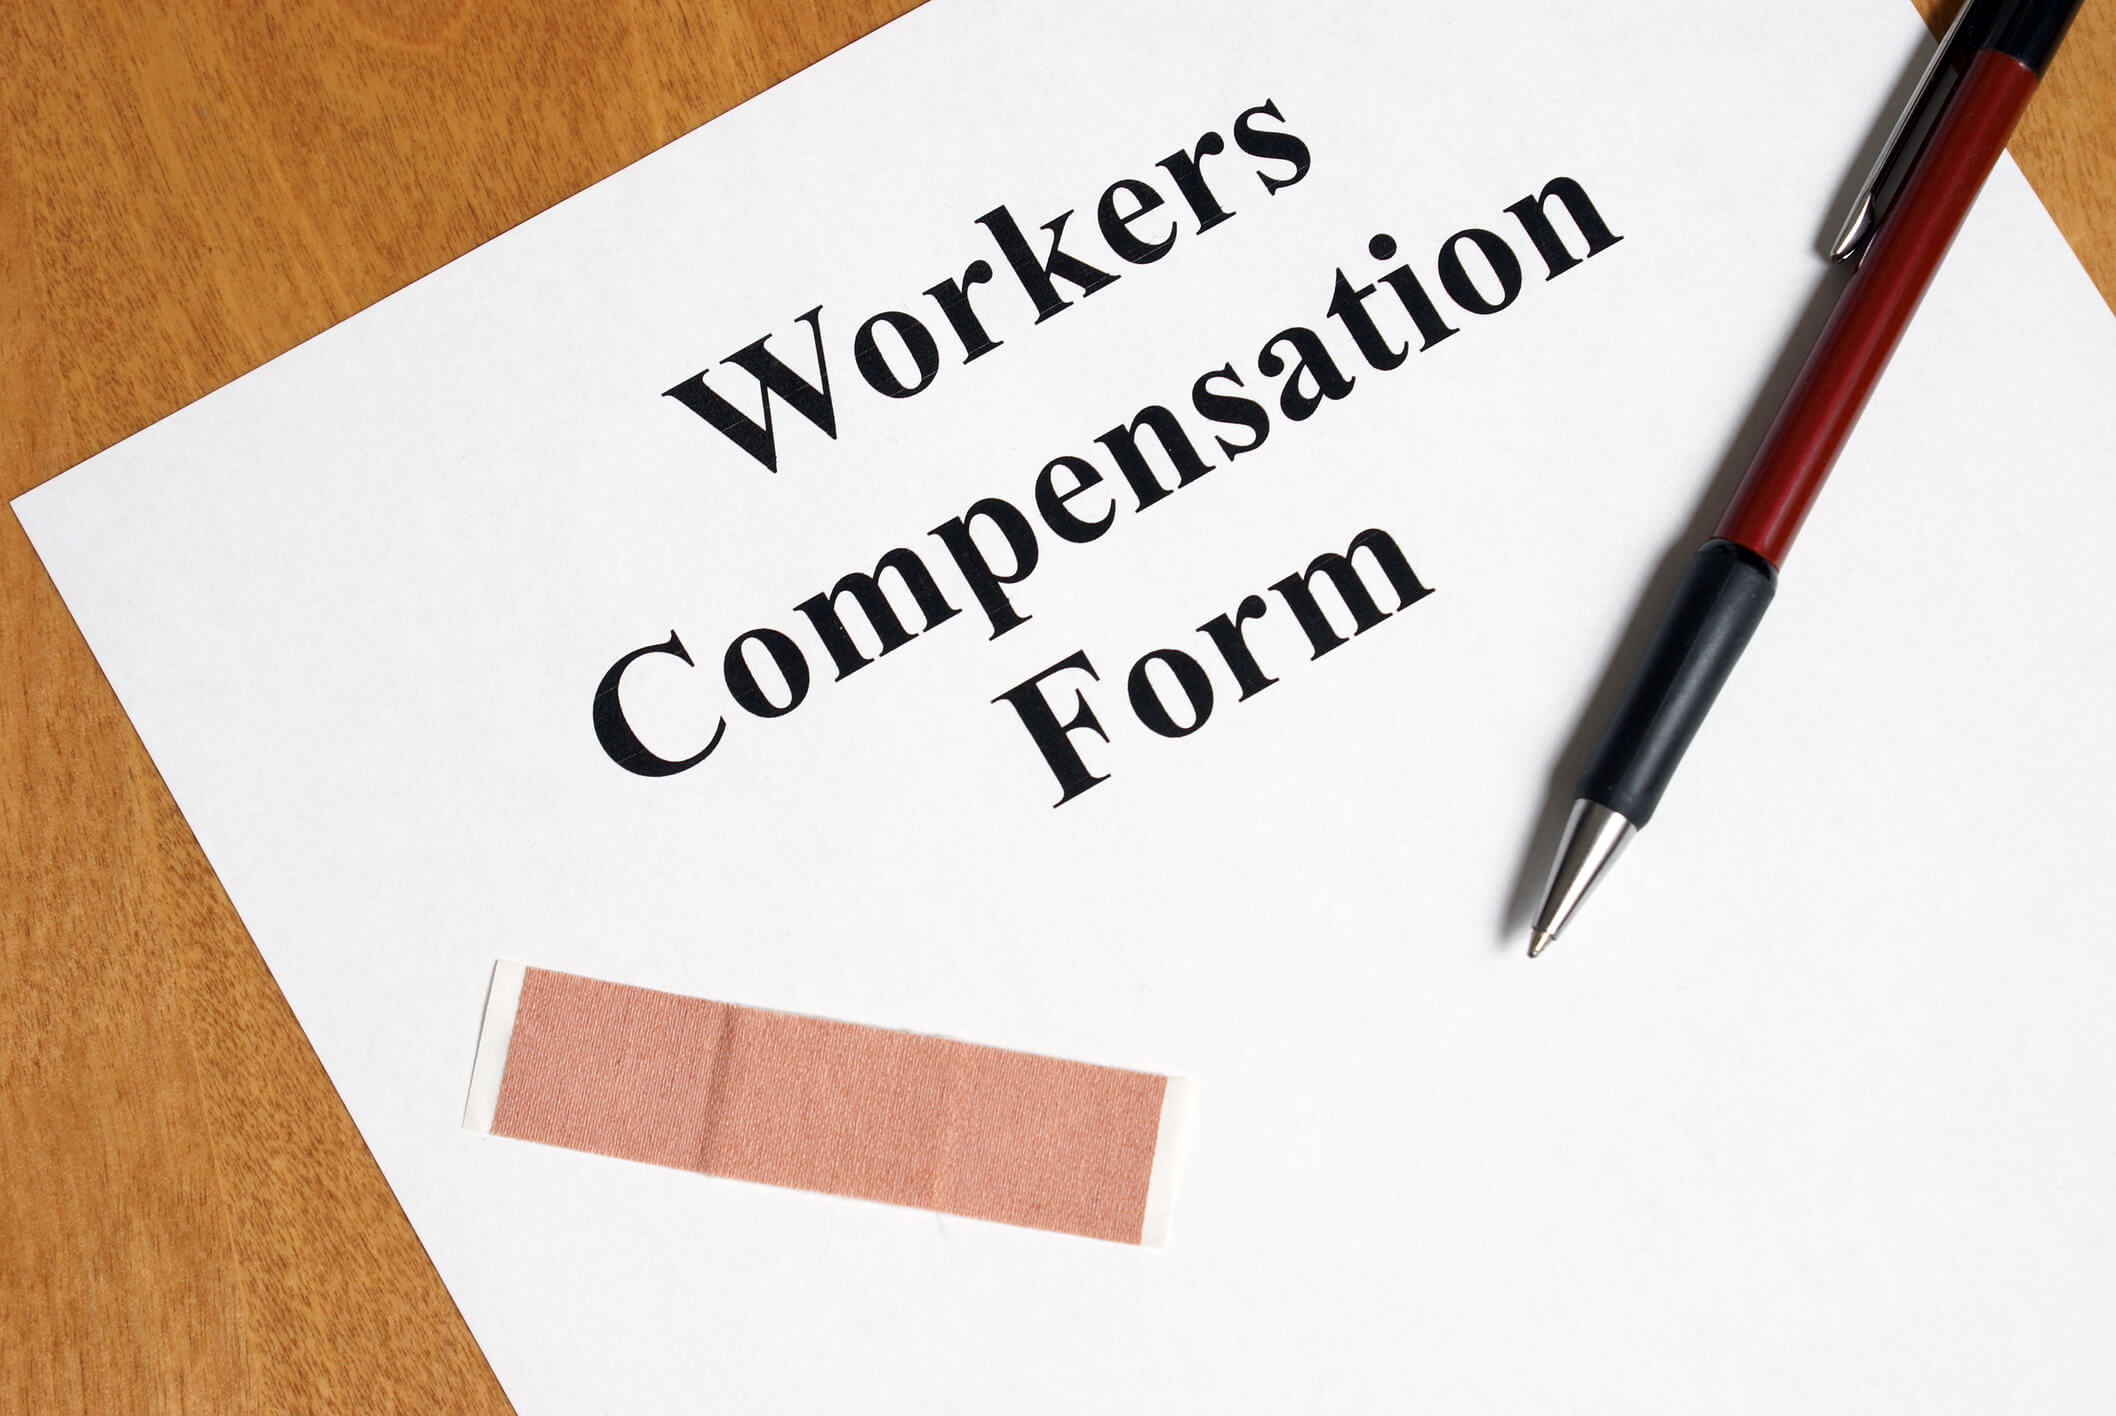 Worker's Compensation Insurance - Complete Controller